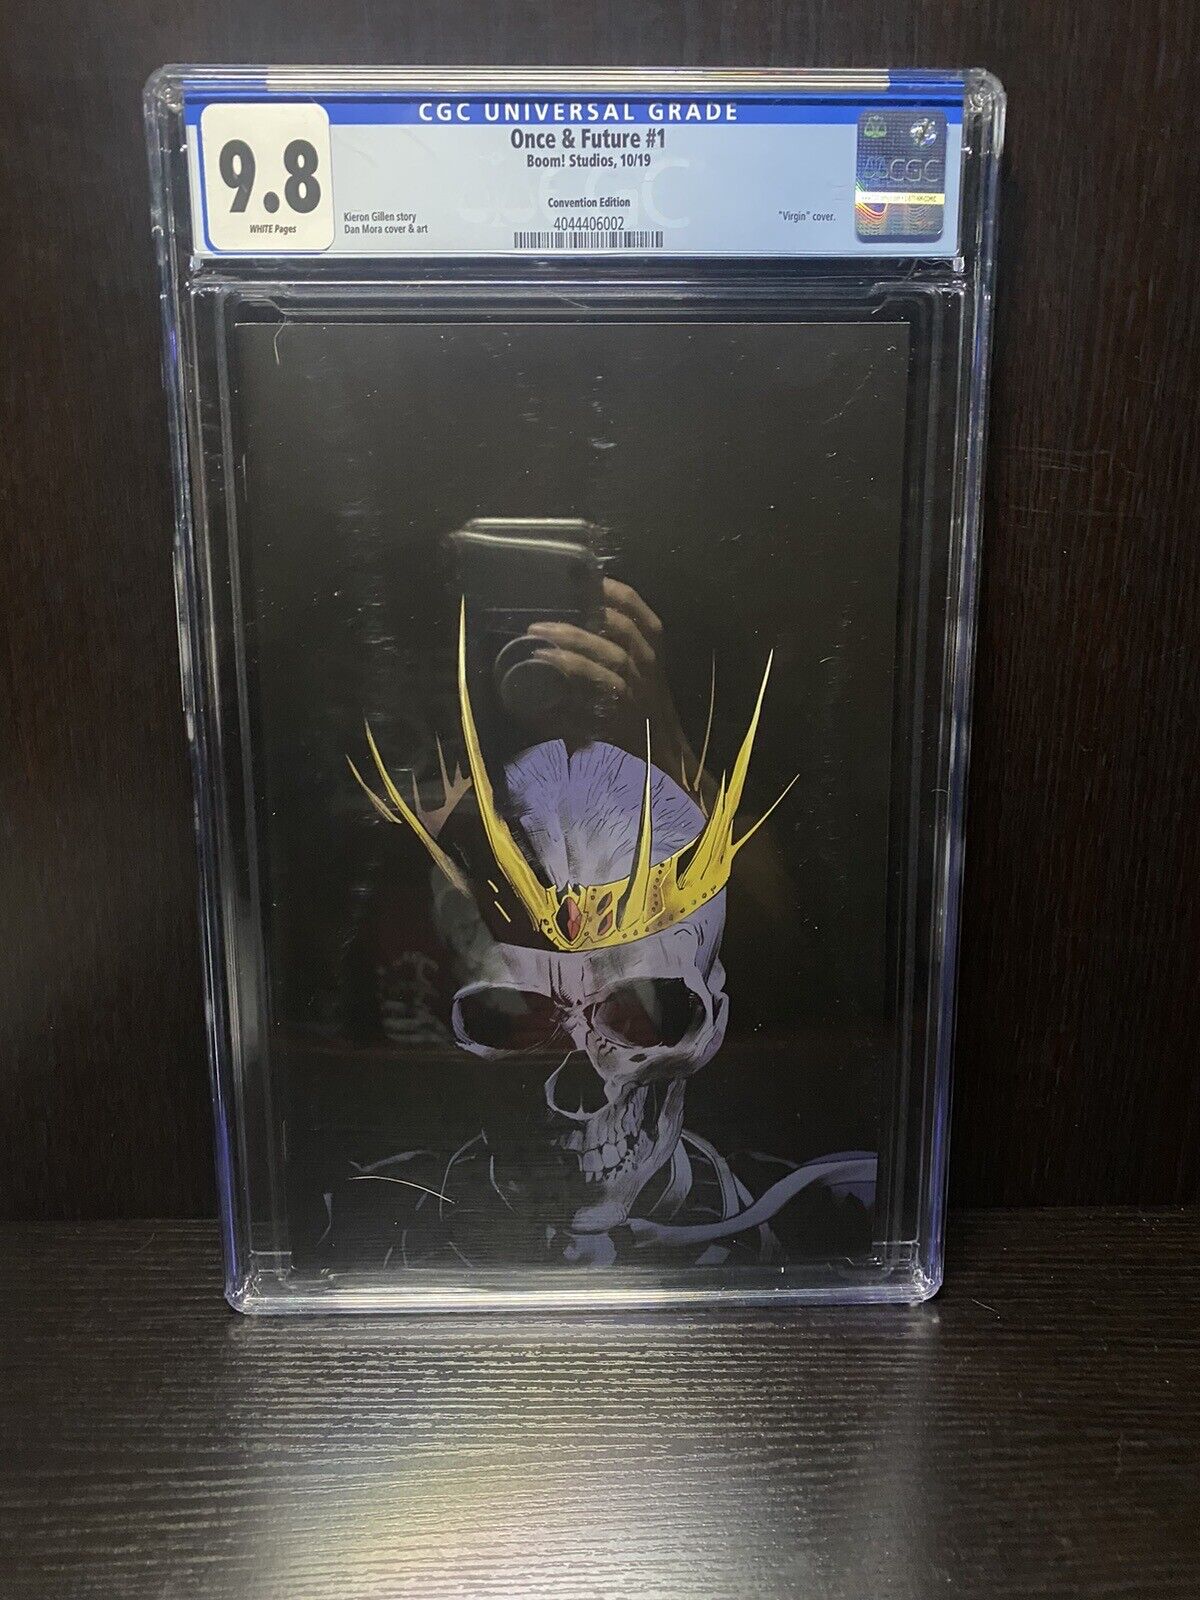 Once and & Future 1 NYCC Gold Crown Variant CGC 9.8 Limited To 250 copies